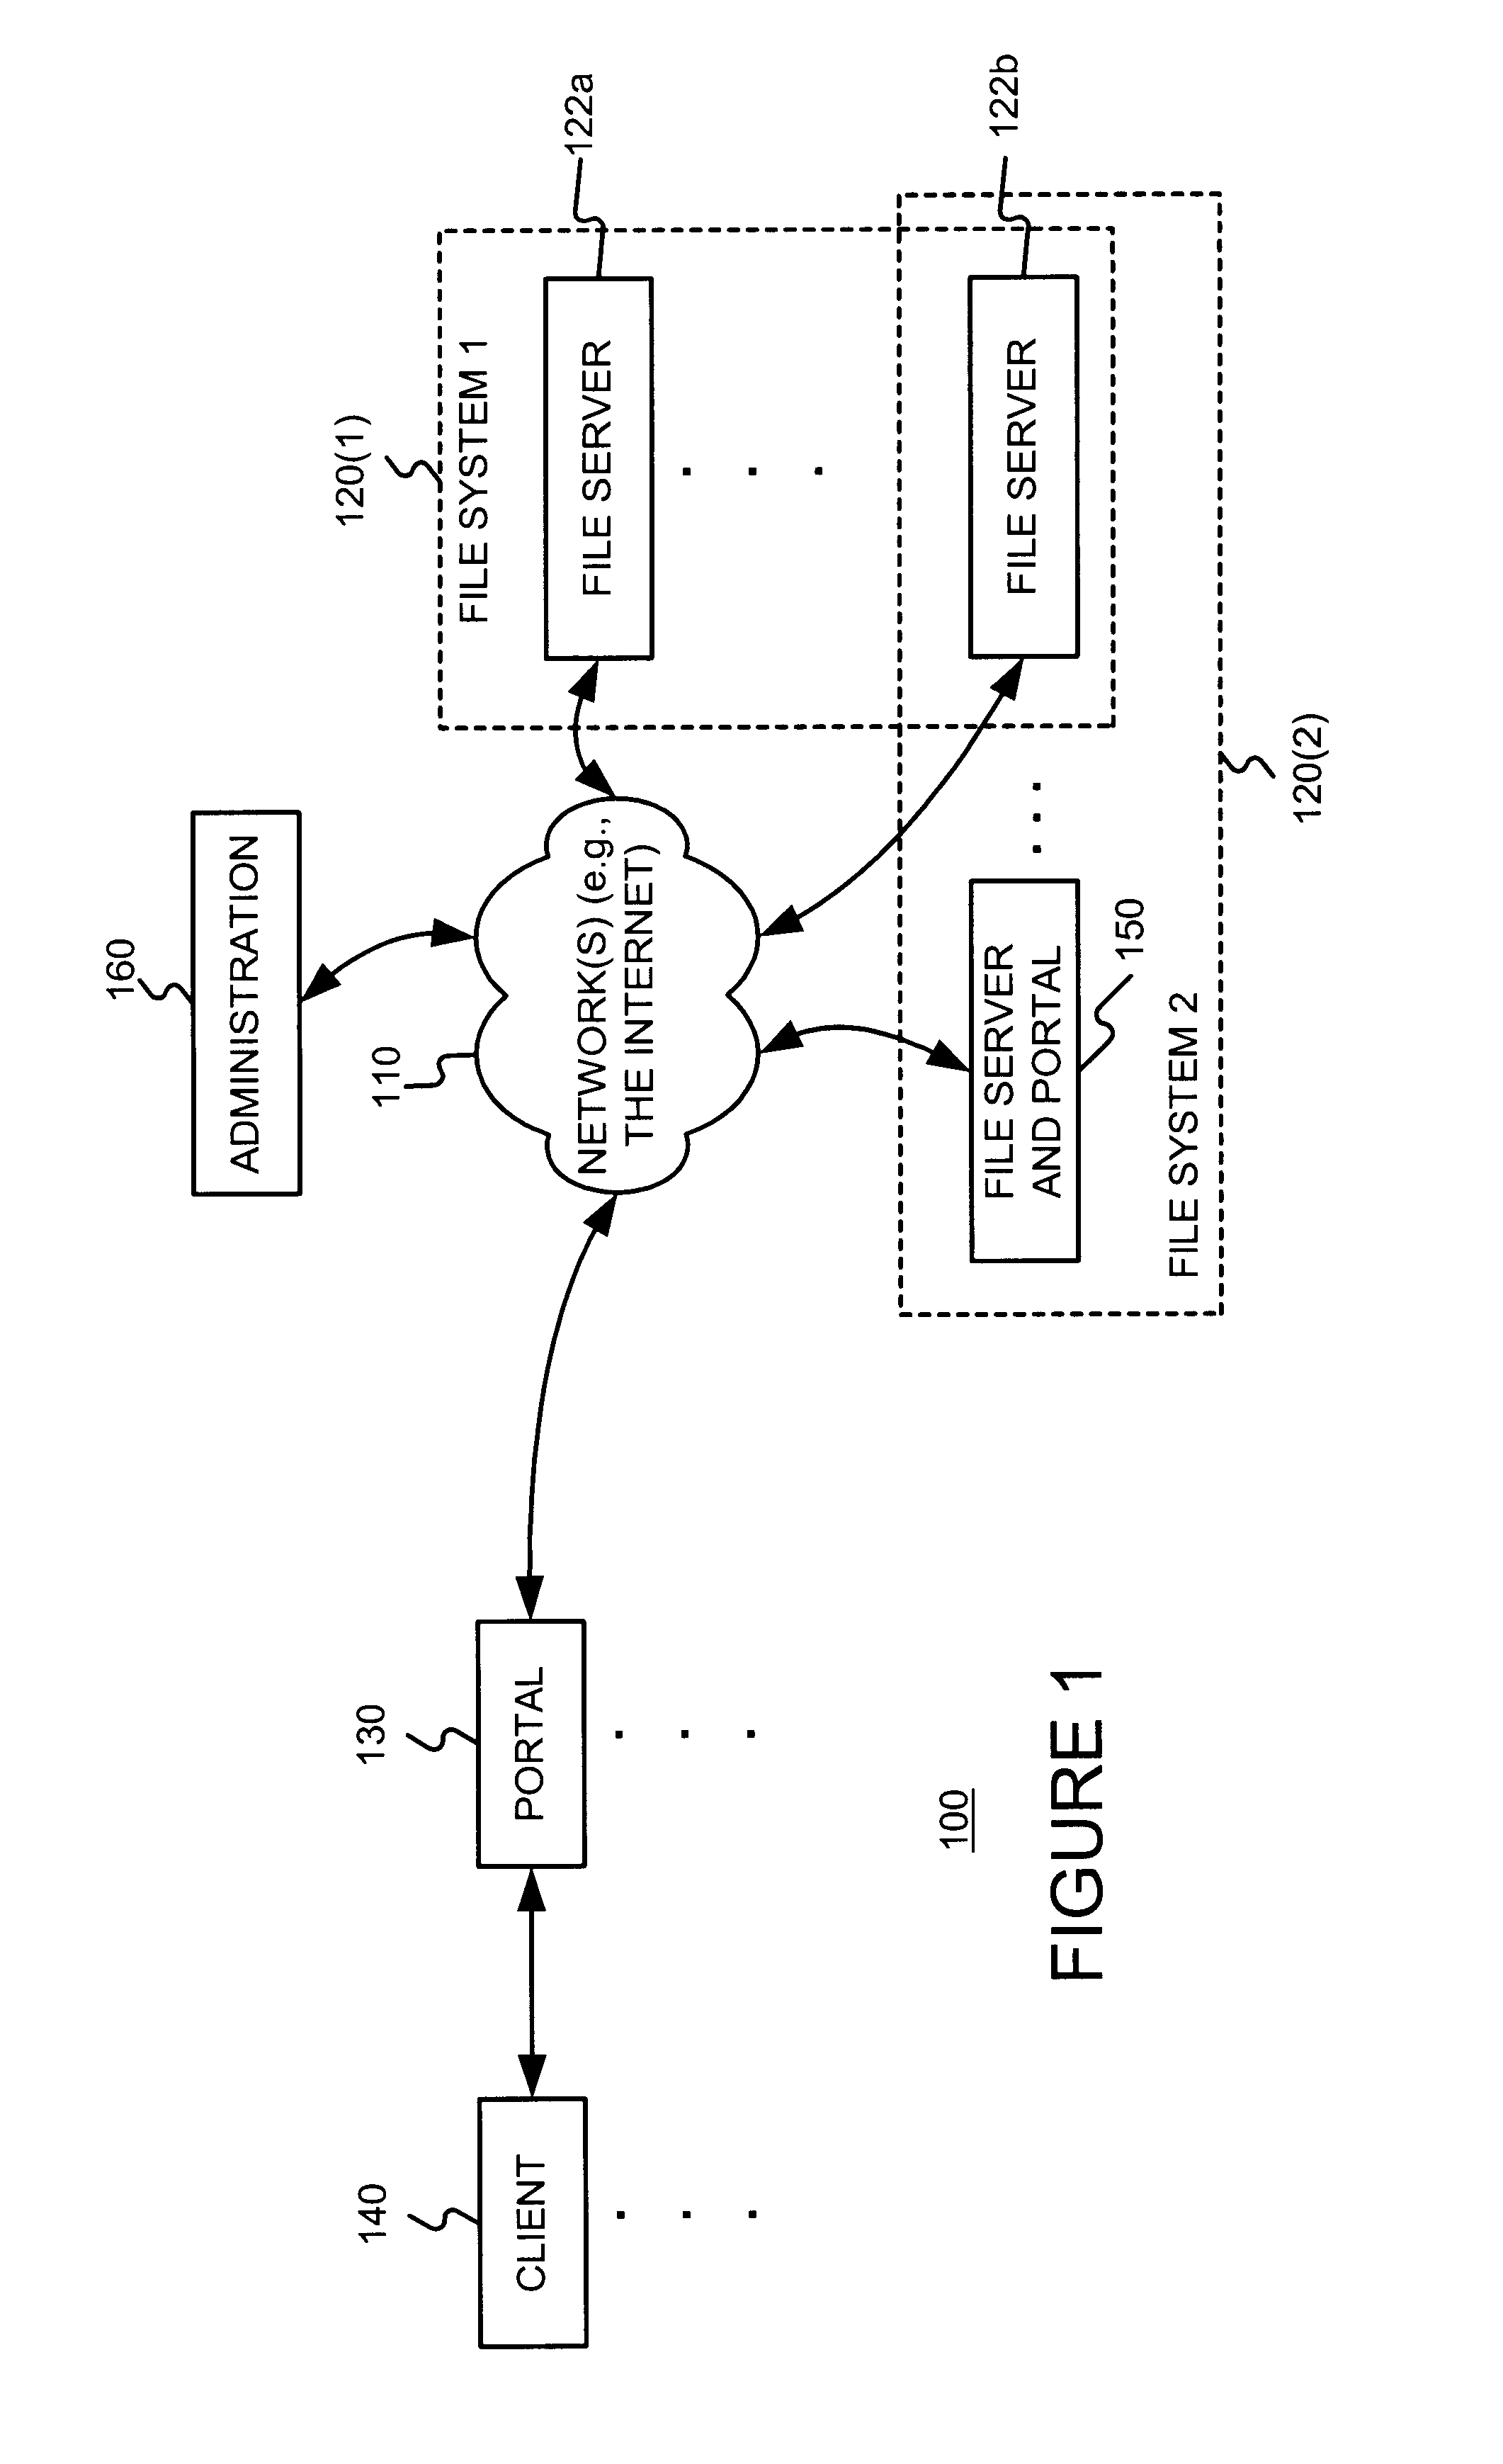 Distributing files across multiple, permissibly heterogeneous, storage devices